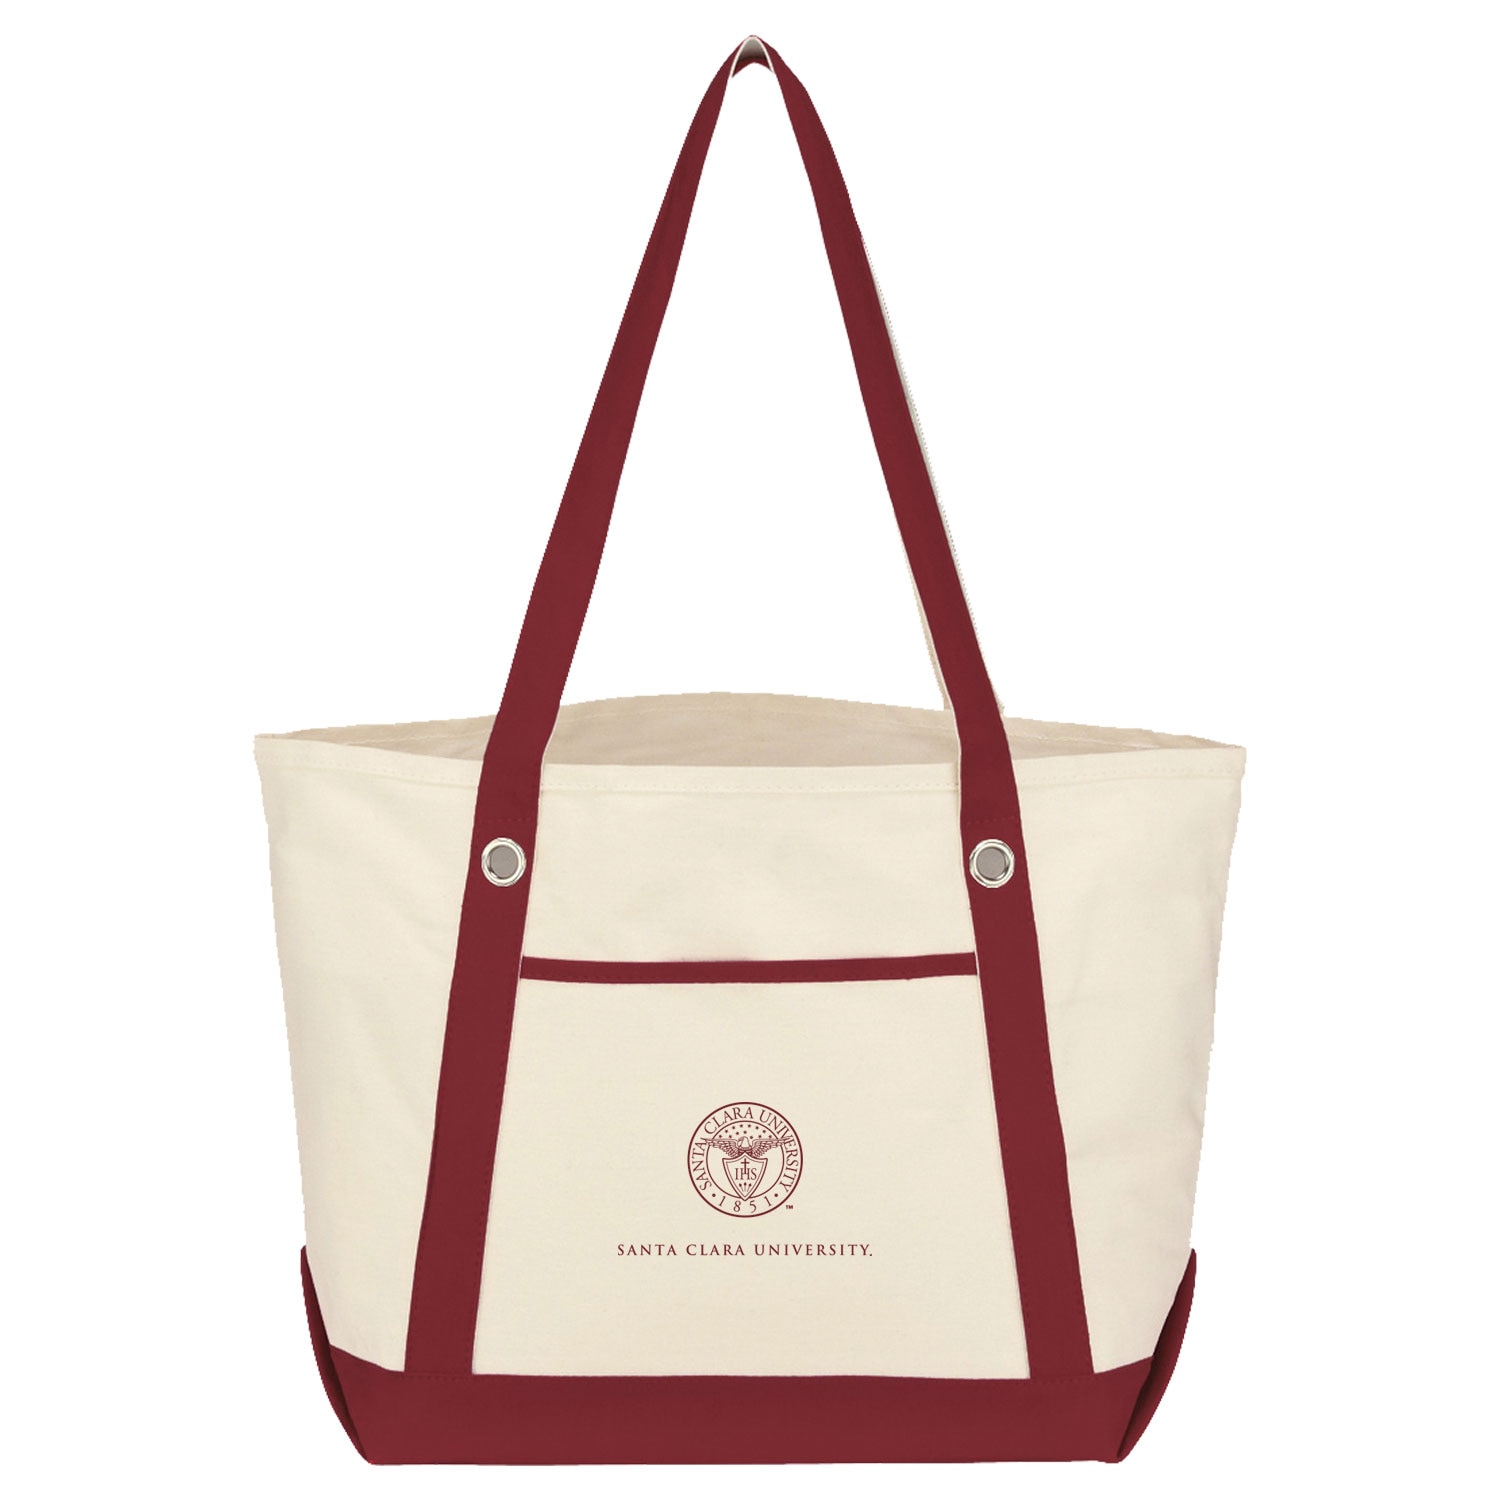 The University of the South Medium Canvas Boat Tote